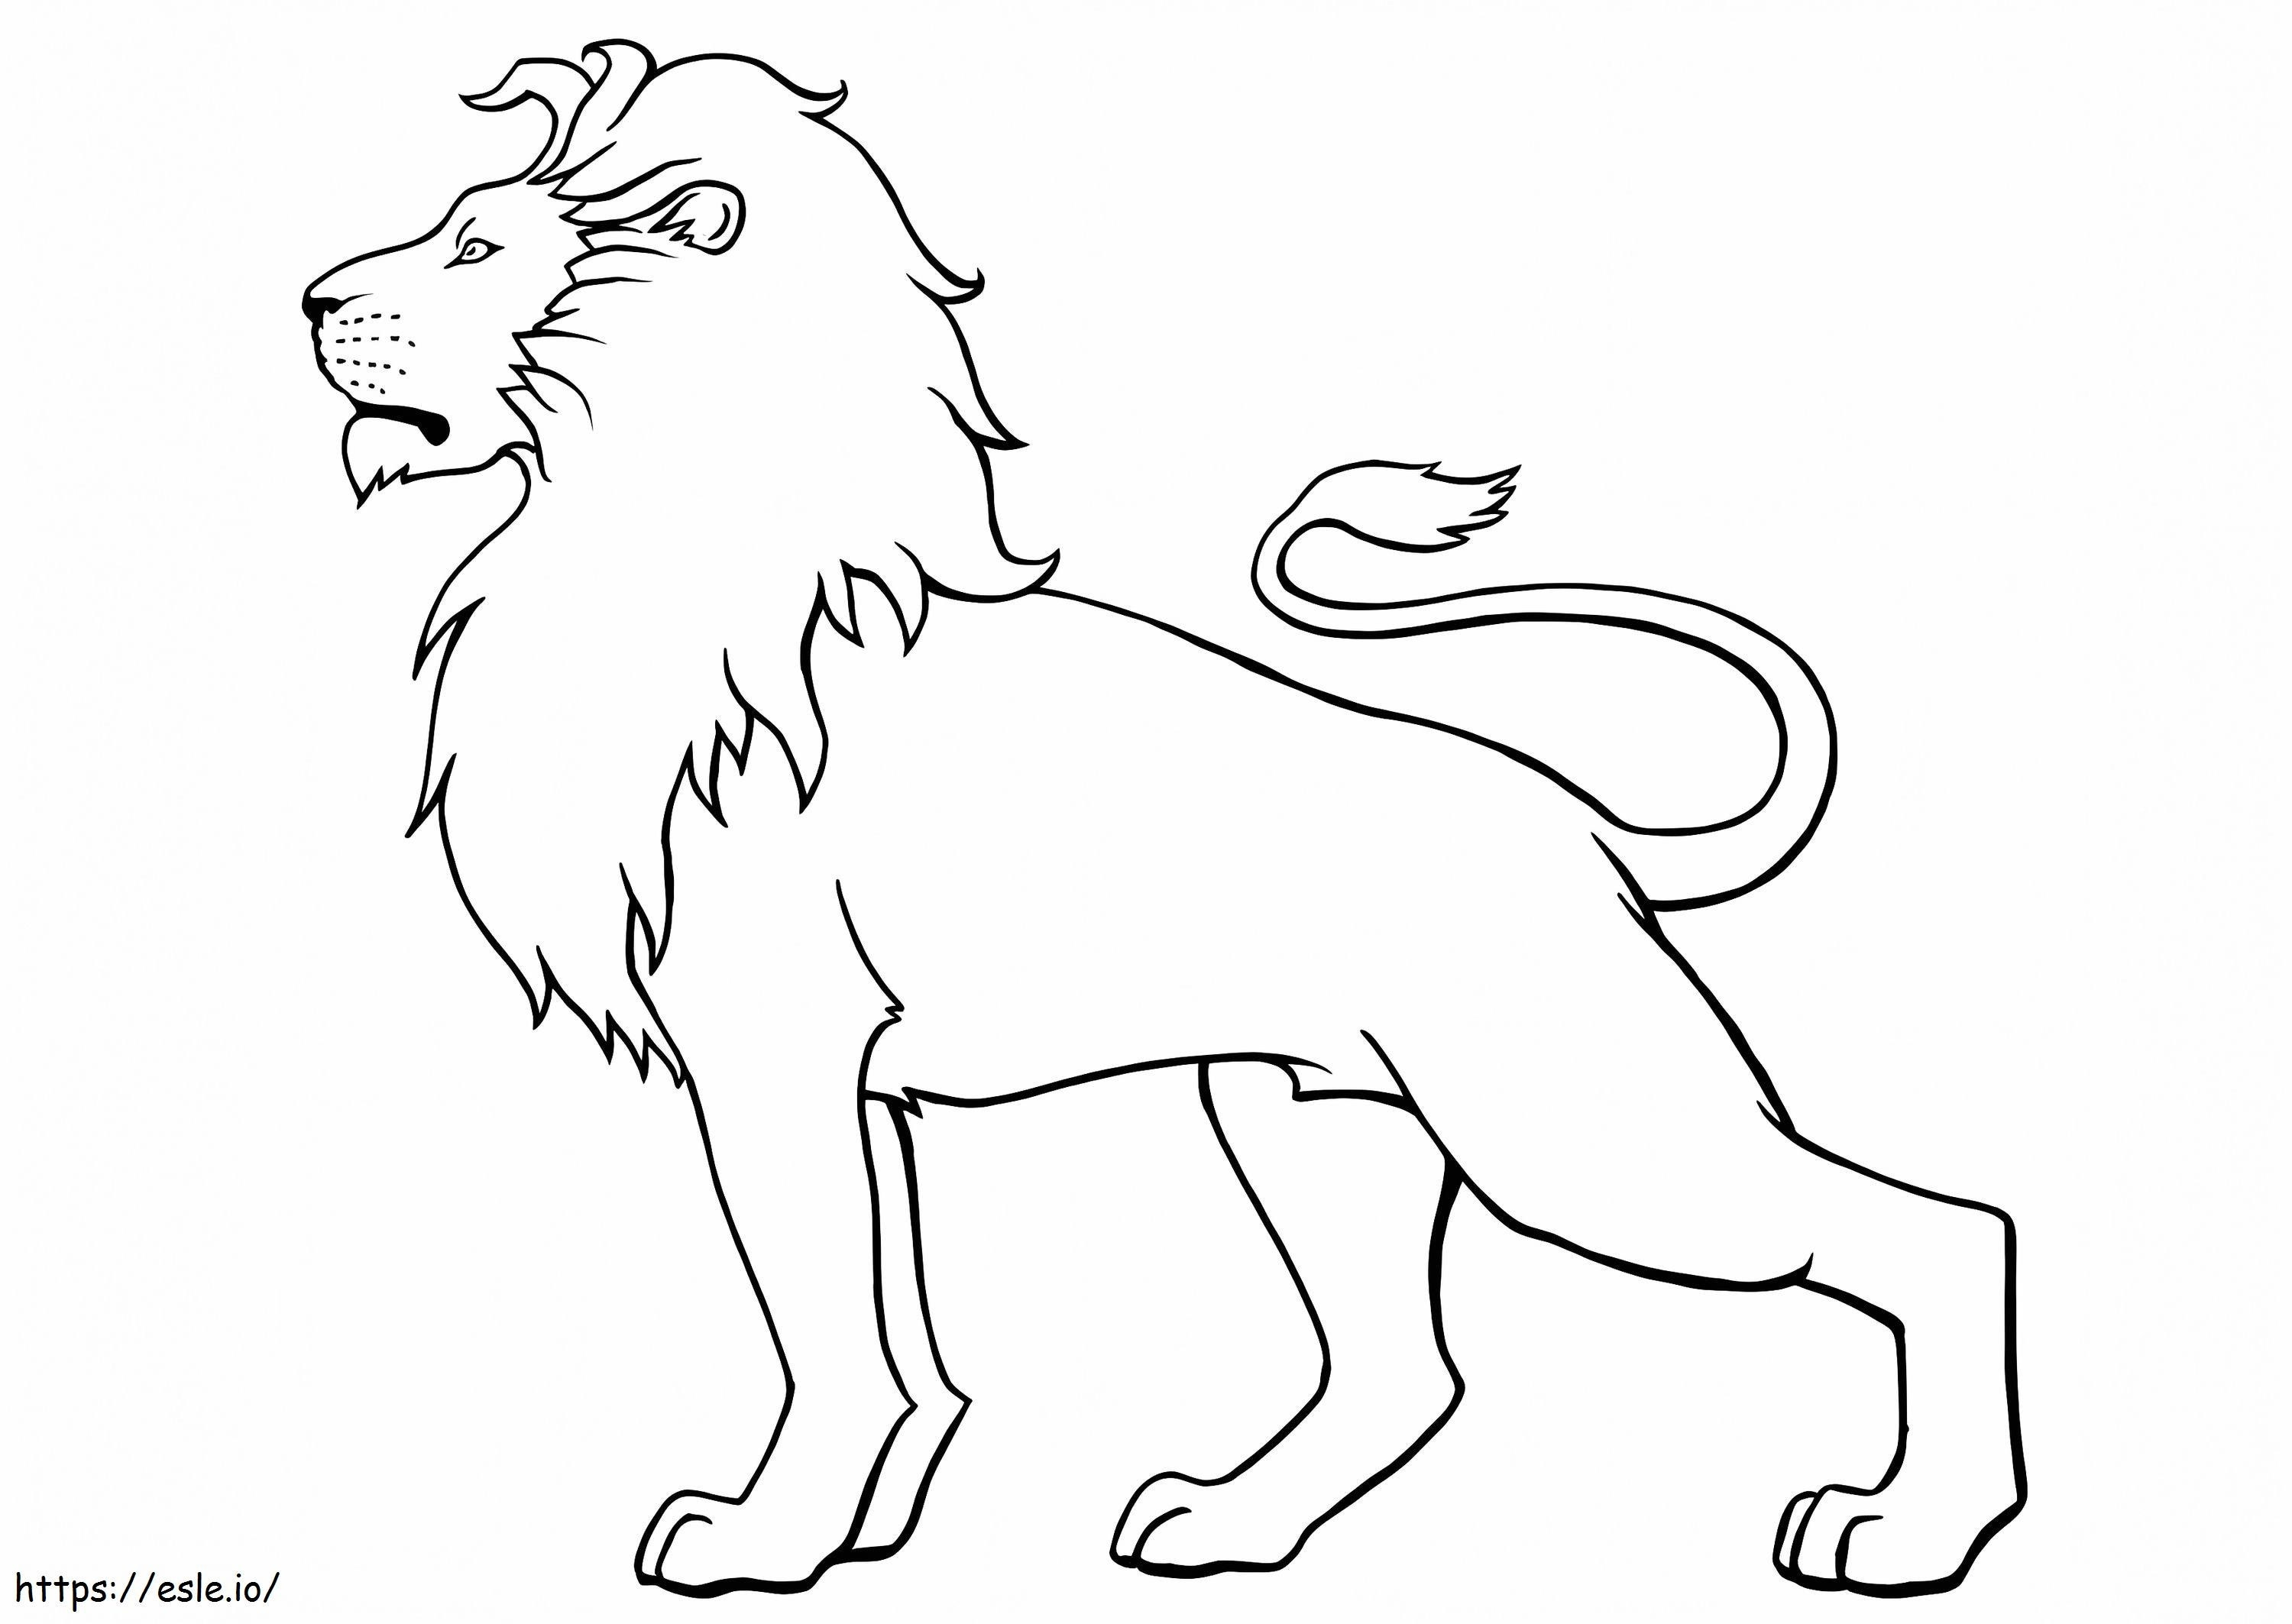 Amazing Lion coloring page